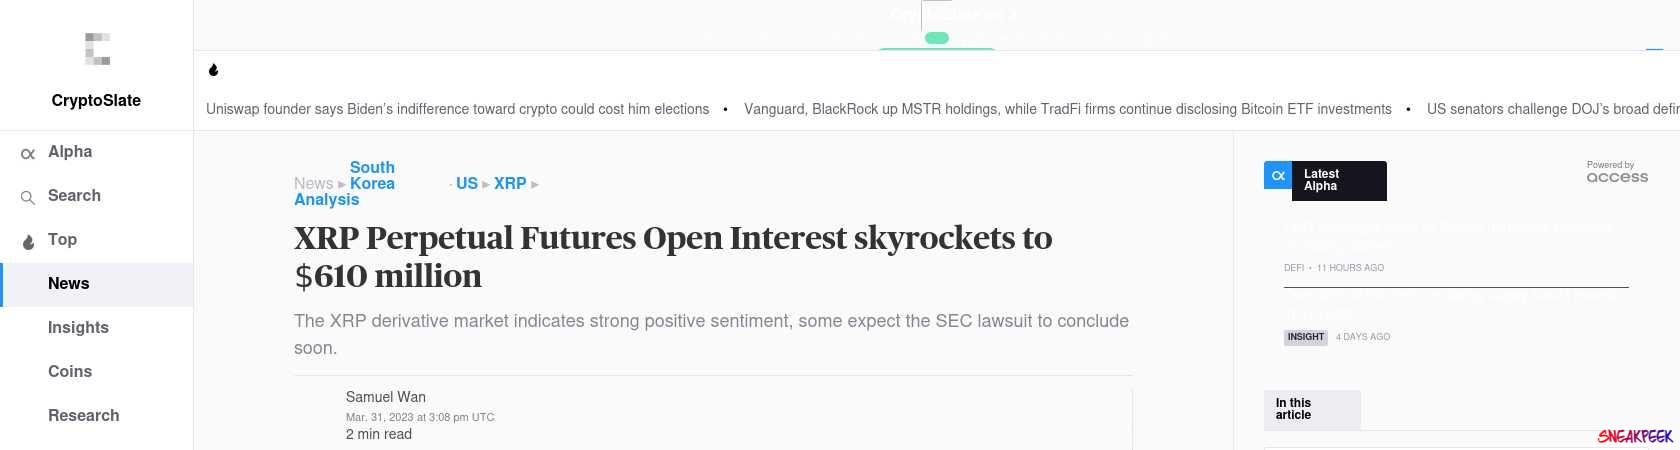 Read the full Article:  ⭲ XRP Perpetual Futures Open Interest skyrockets to $610 million